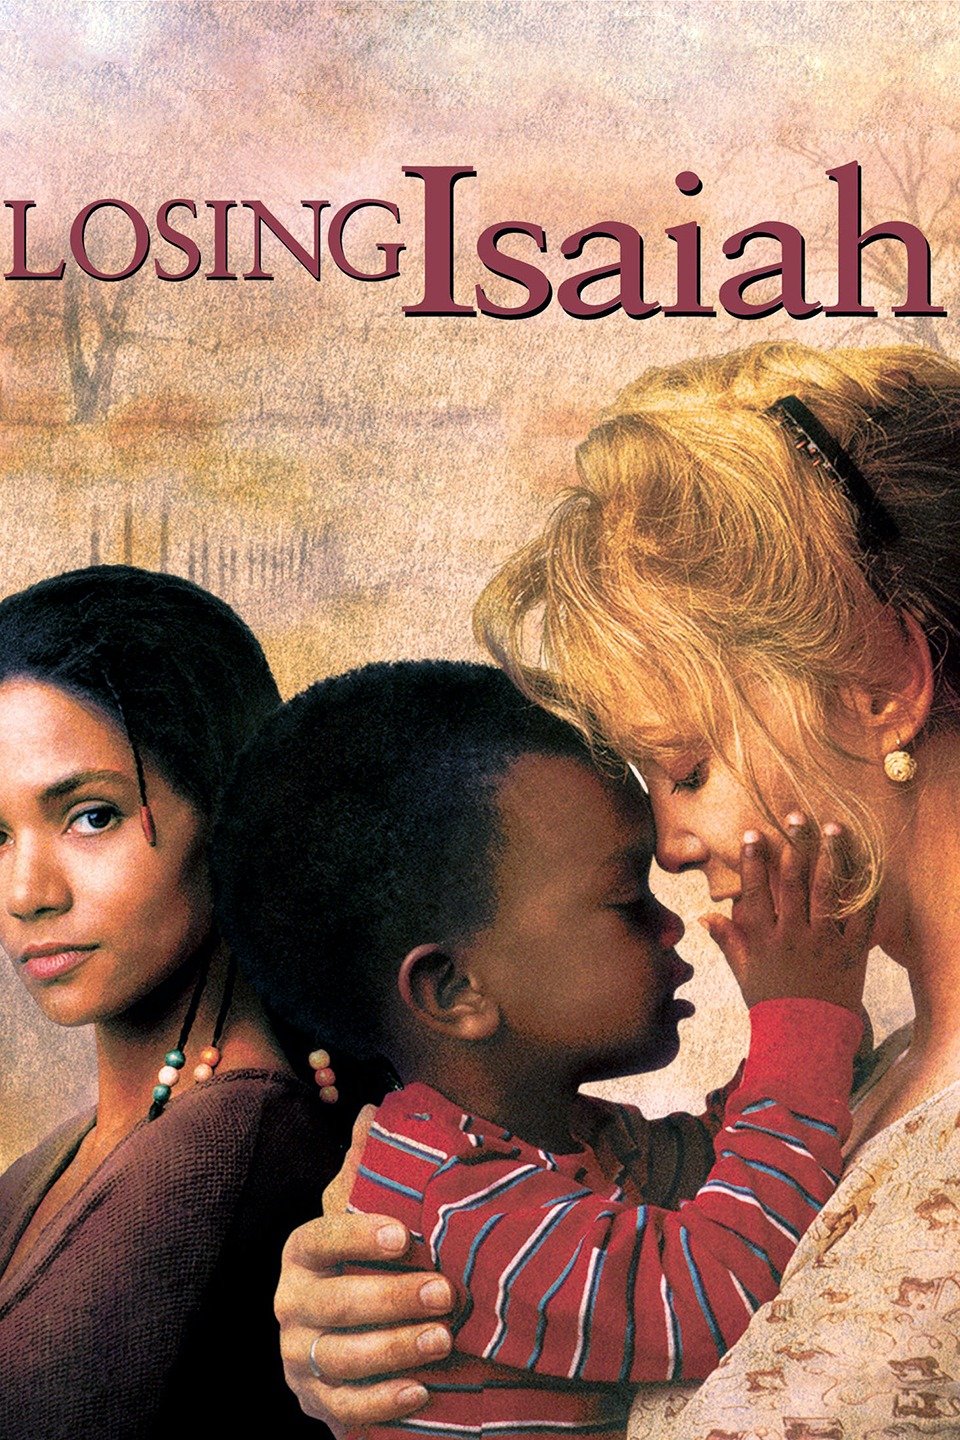 Losing Isaiah. Movie Poster. Jessica Lange. Halle Berry. Young Boy. Mother. Closeup.